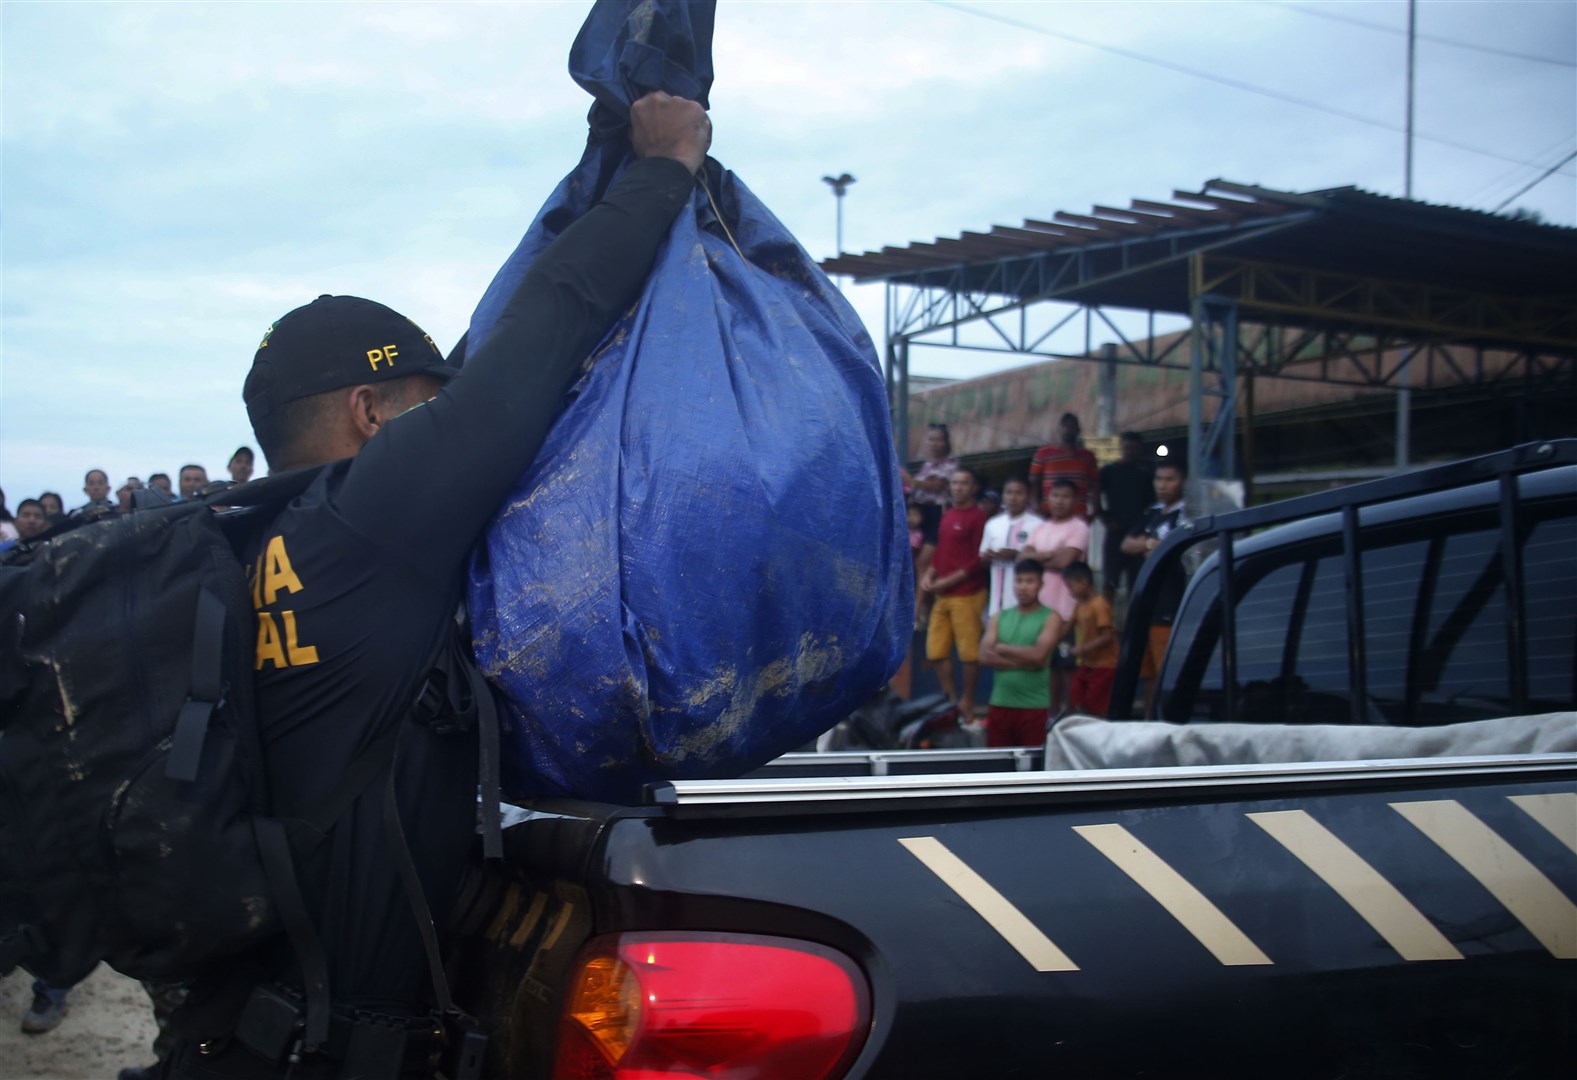 A Federal Police officer loads a truck with items found during a search for the men (Edmar Barros/AP)